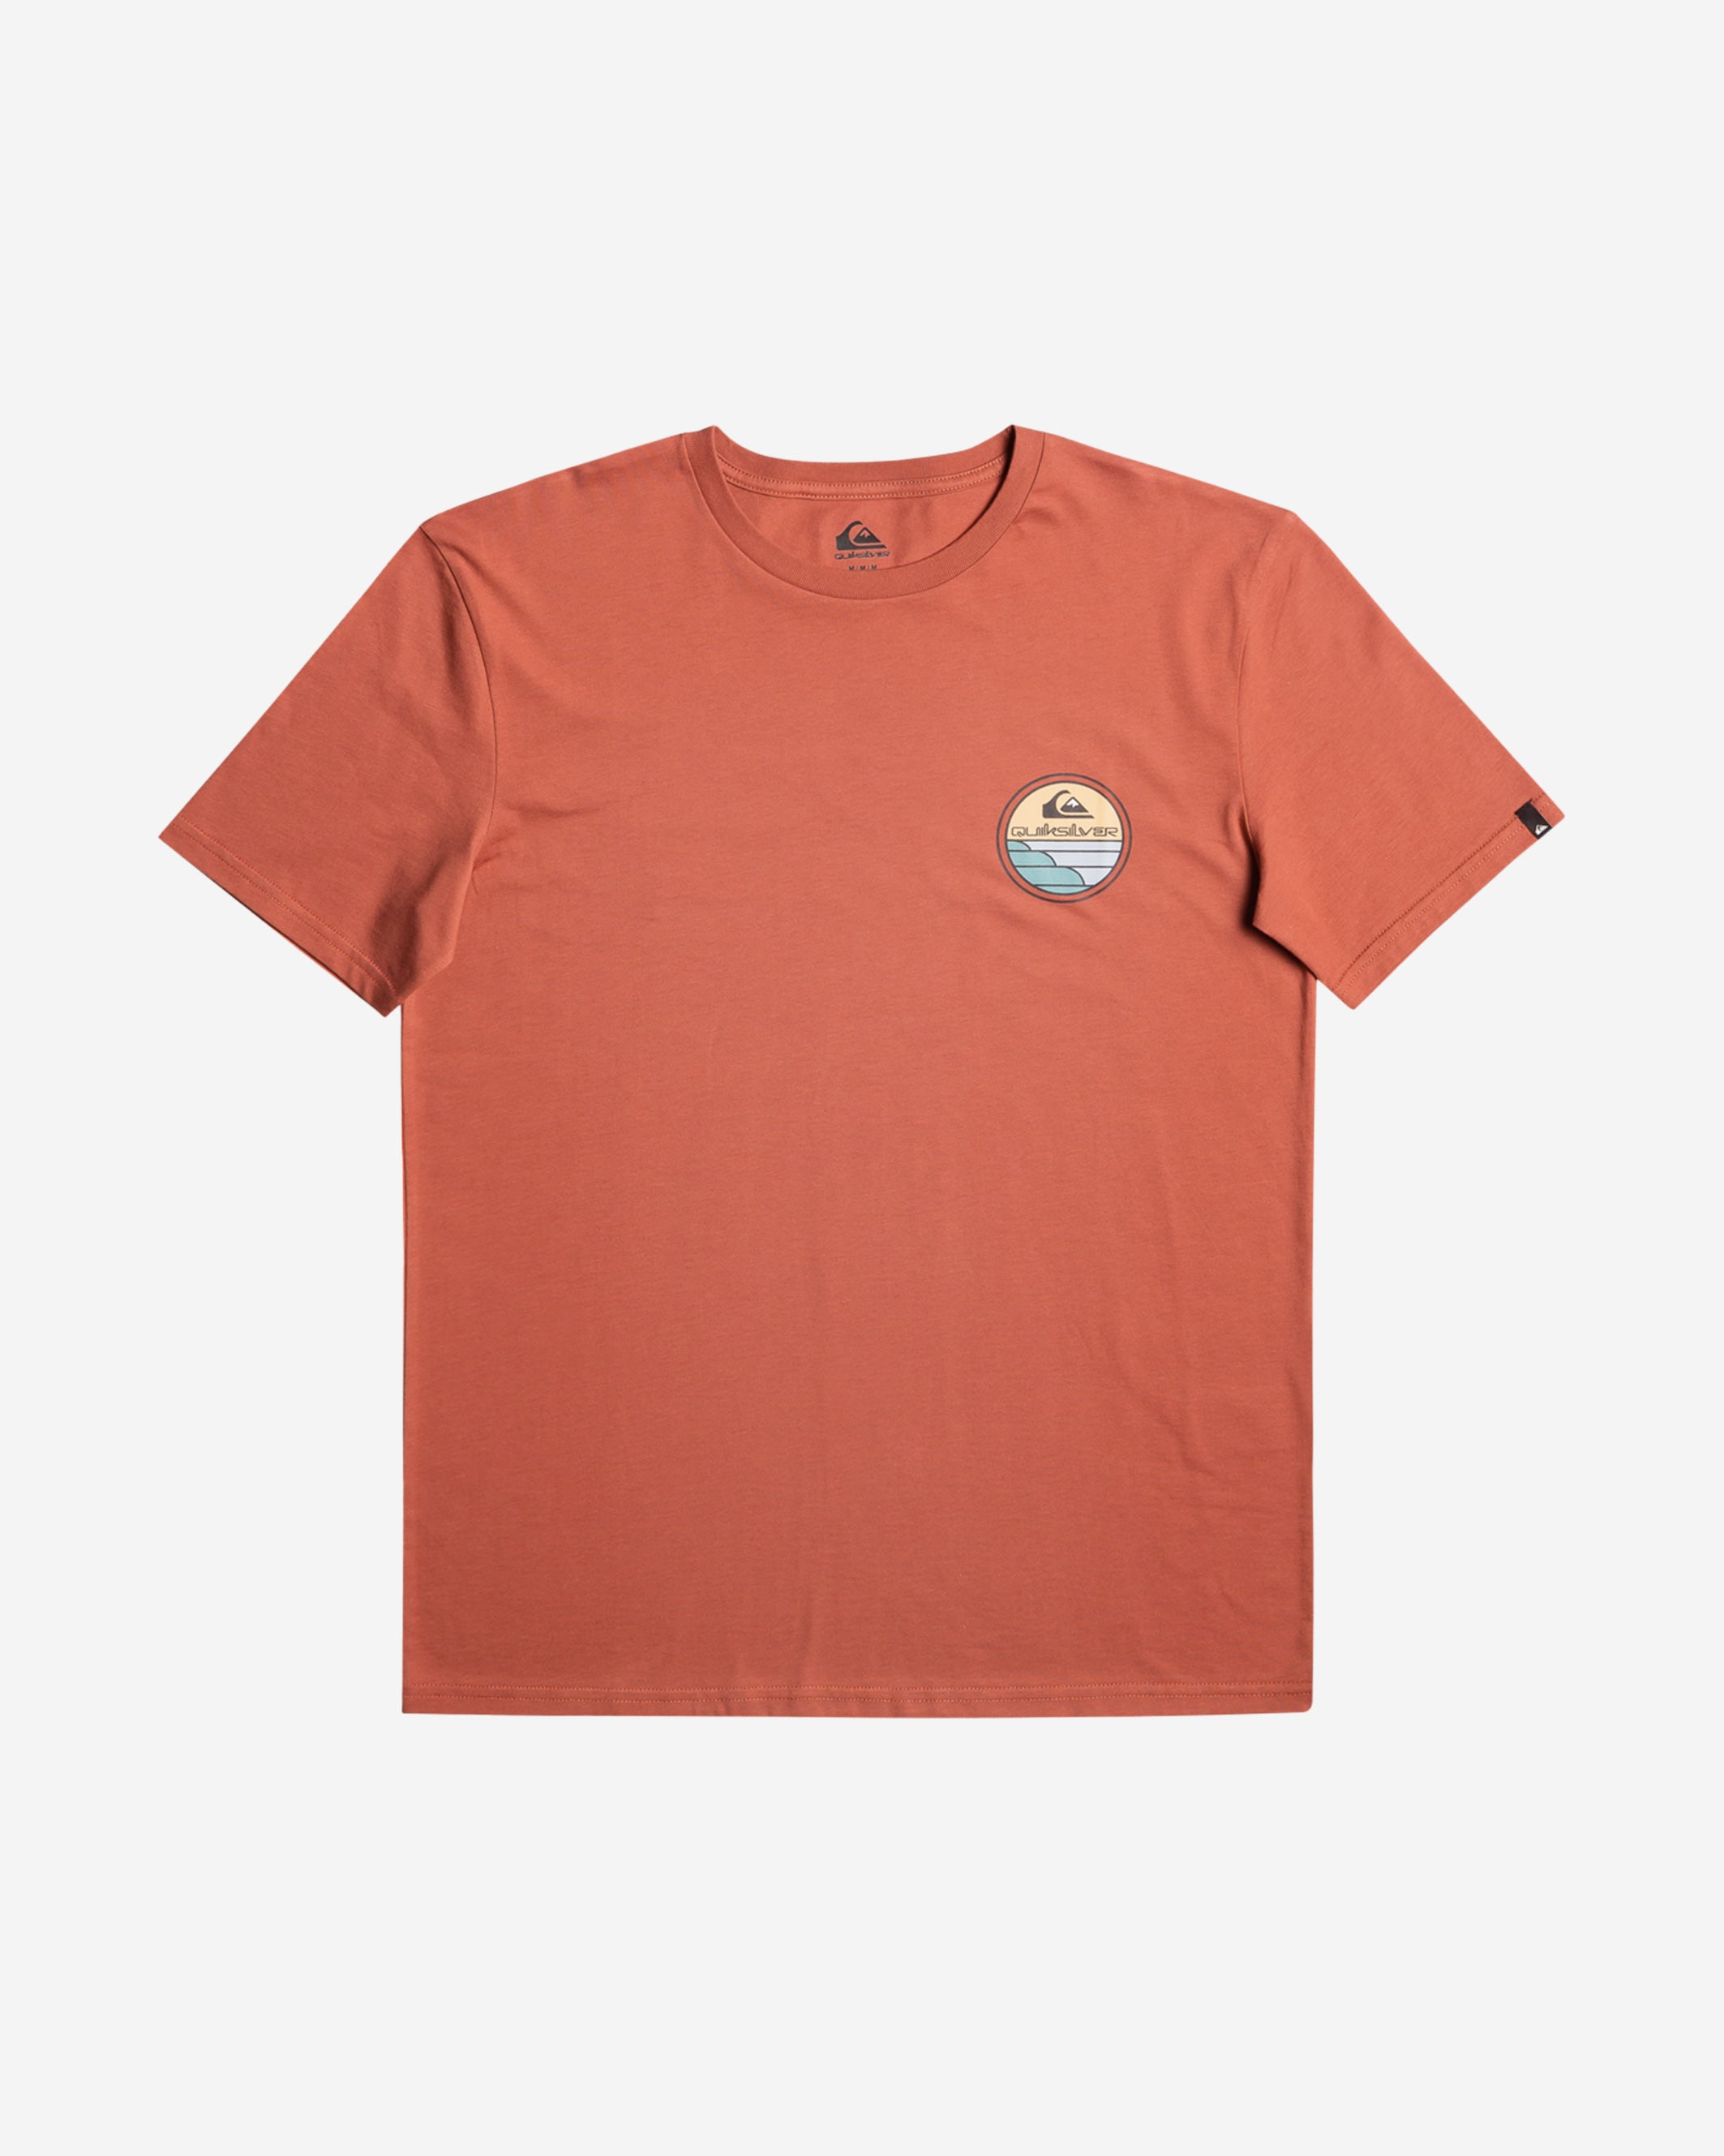 The sun, sea, and Quiksilver. The Scenic Journey t-shirt gives you everything you're into, along with the soft comfort of combed cotton.